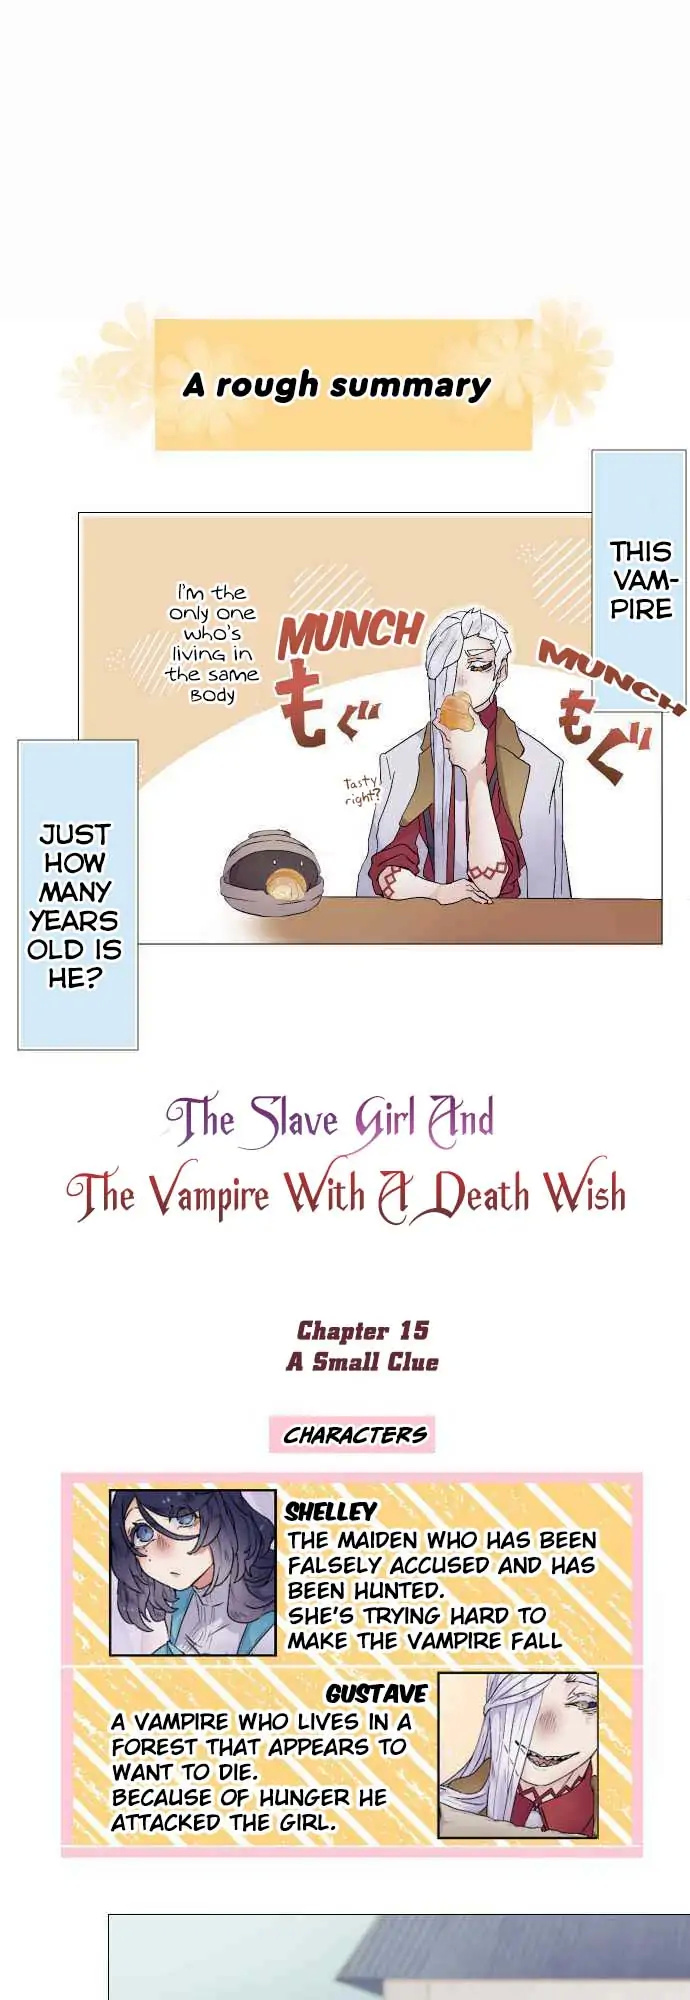 The Slave Girl And The Vampire With A Death Wish - Page 2